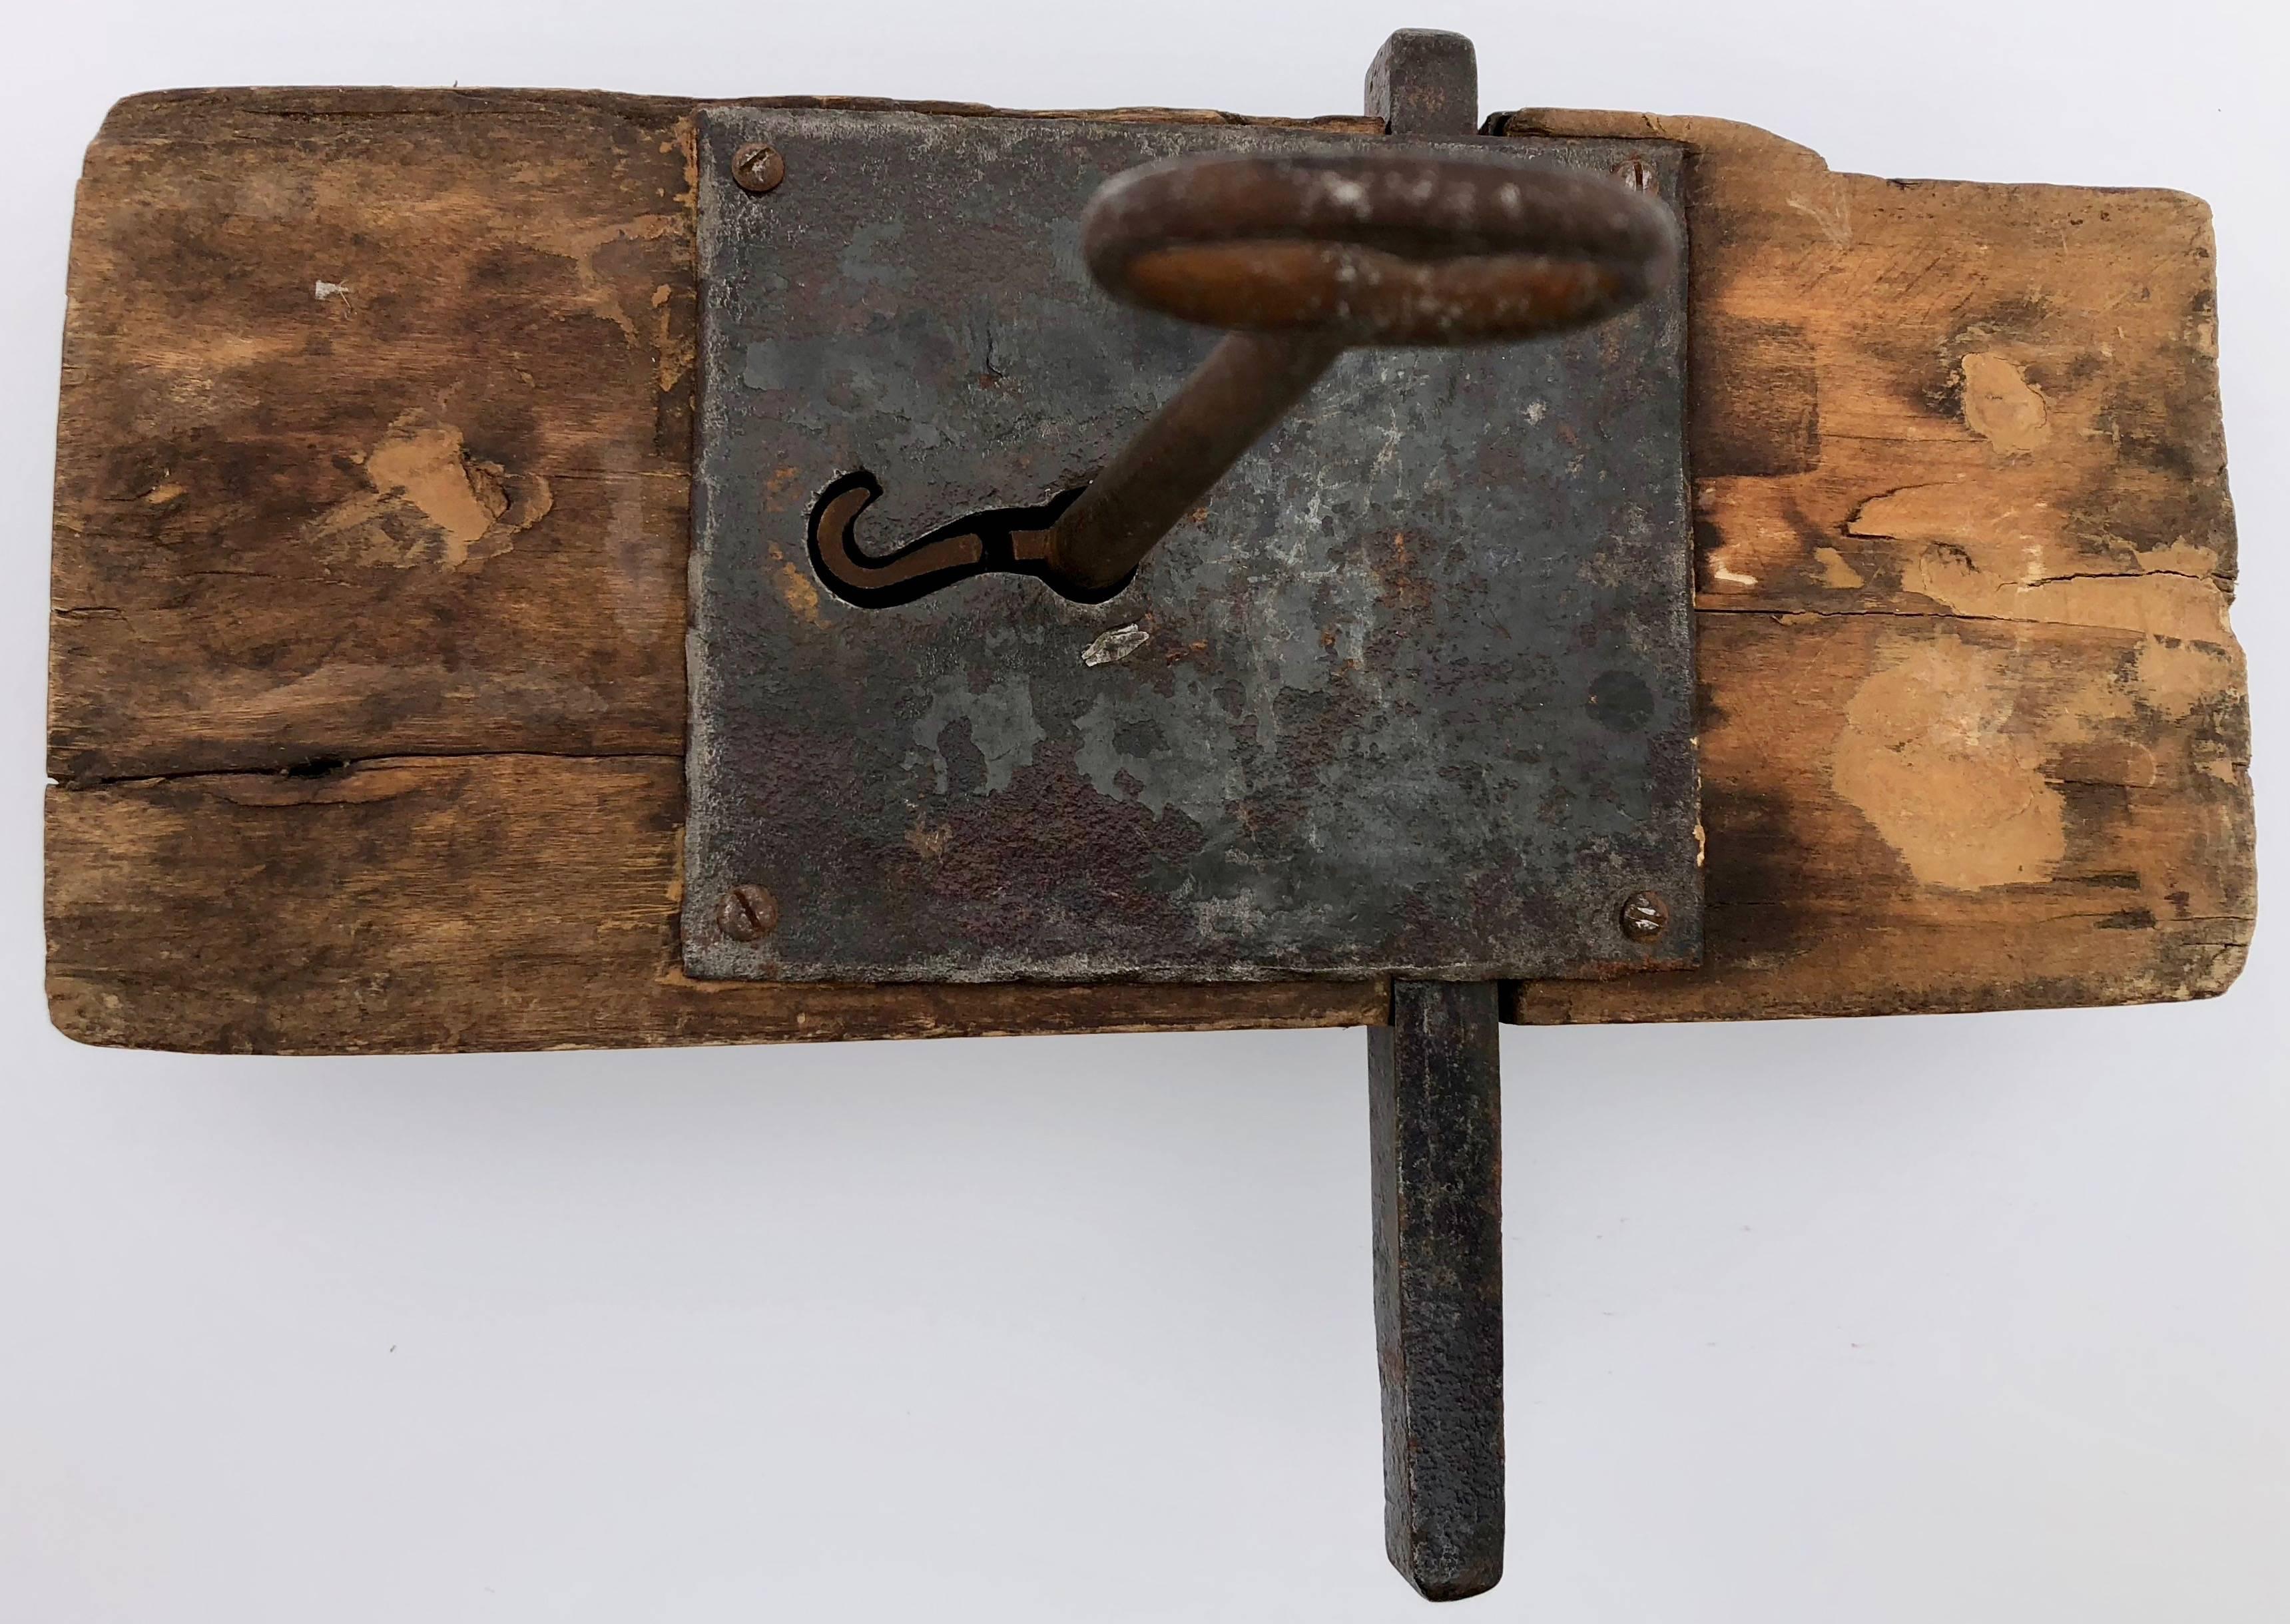 19th Century French Hand-Wrought Iron Mortise Mount Lock on Wood with Forged Key, Louis XVI